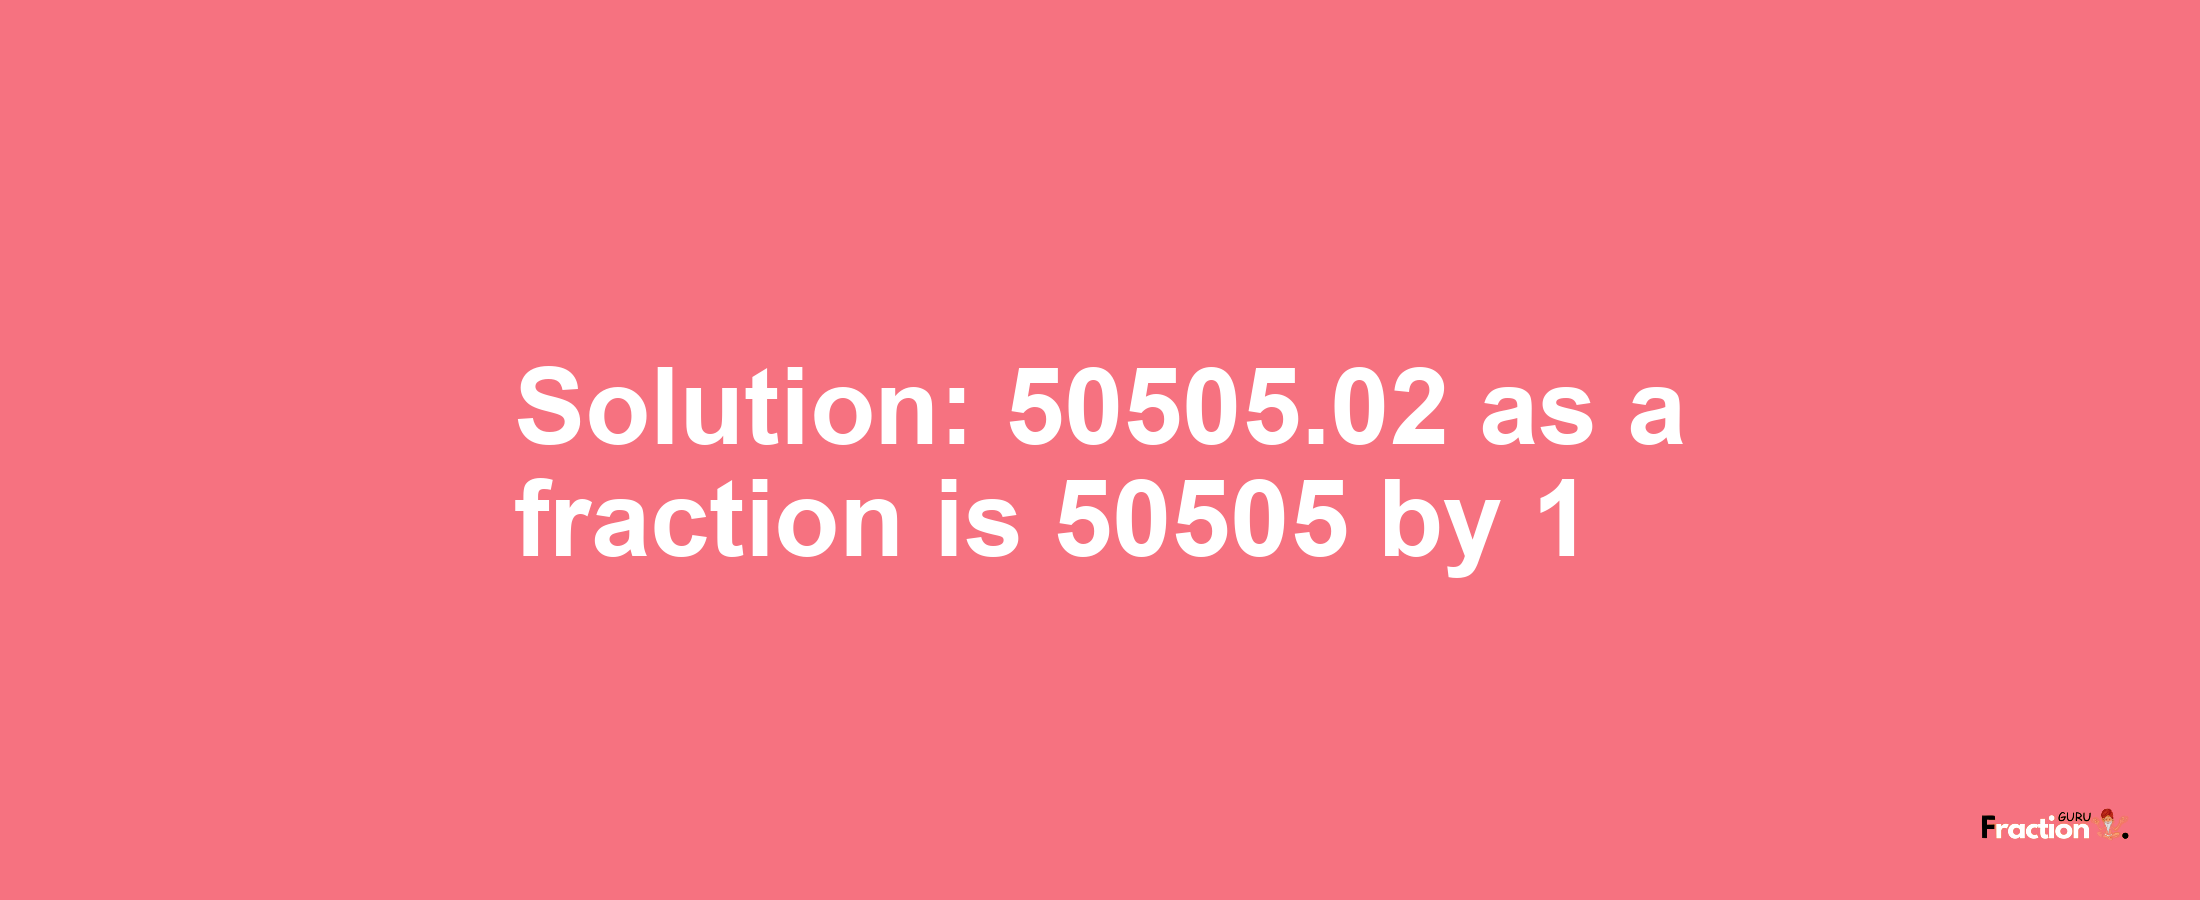 Solution:50505.02 as a fraction is 50505/1